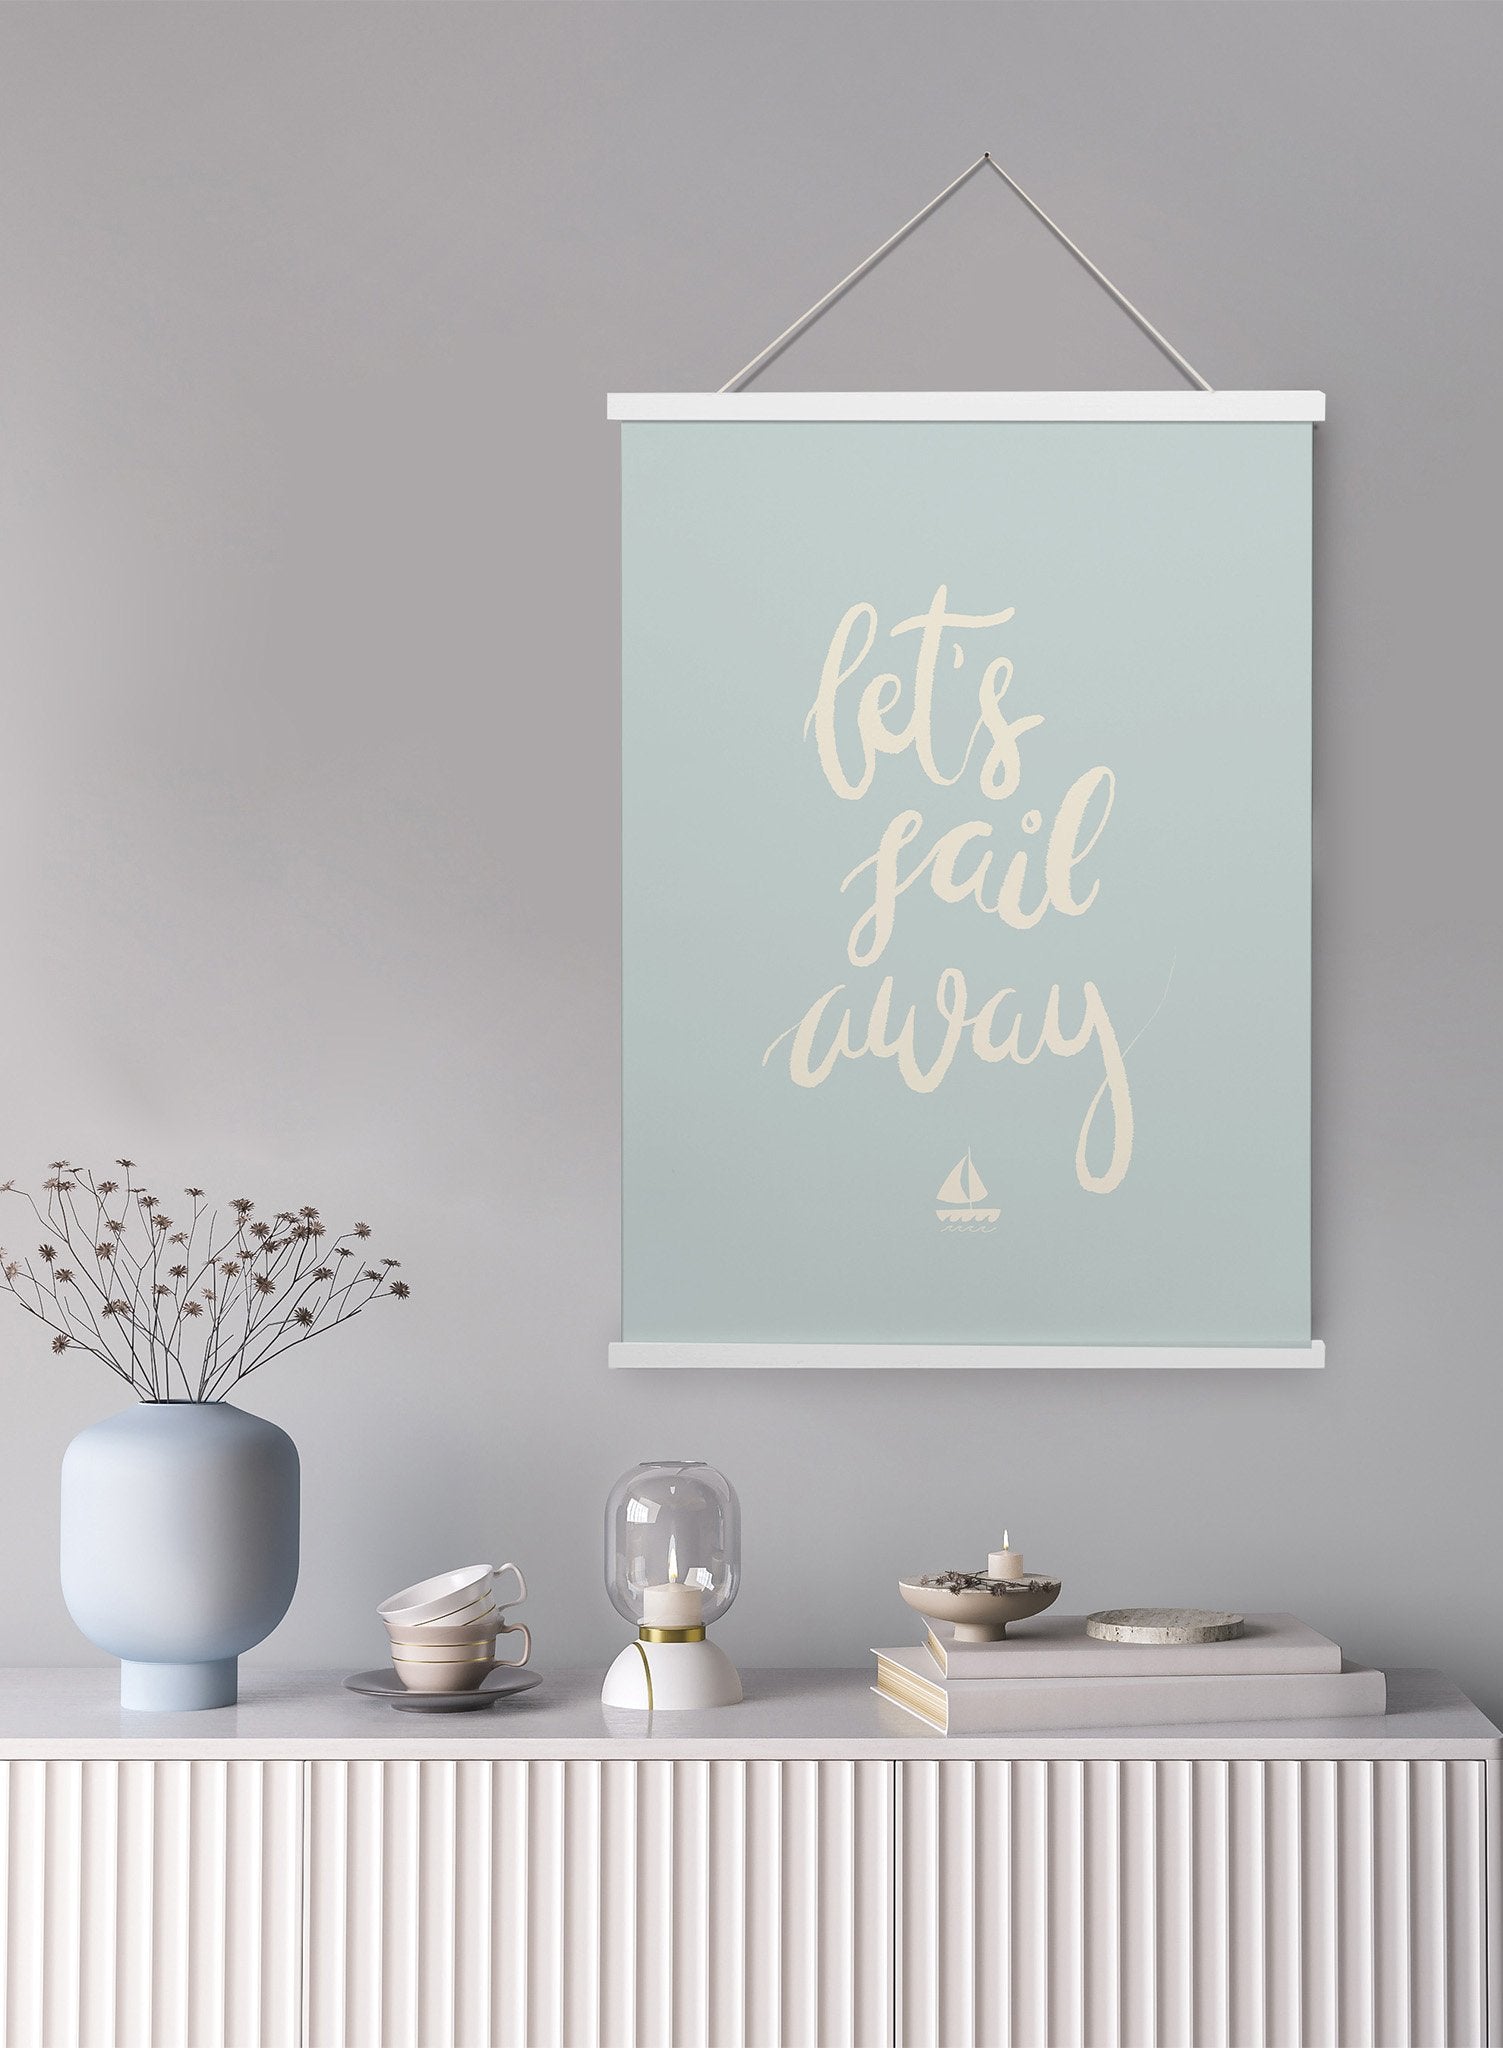 Adventure At Sea is a minimalist illustration and typography of the words "Let's sail away" written cursively with a boat at the bottom by Opposite Wall.